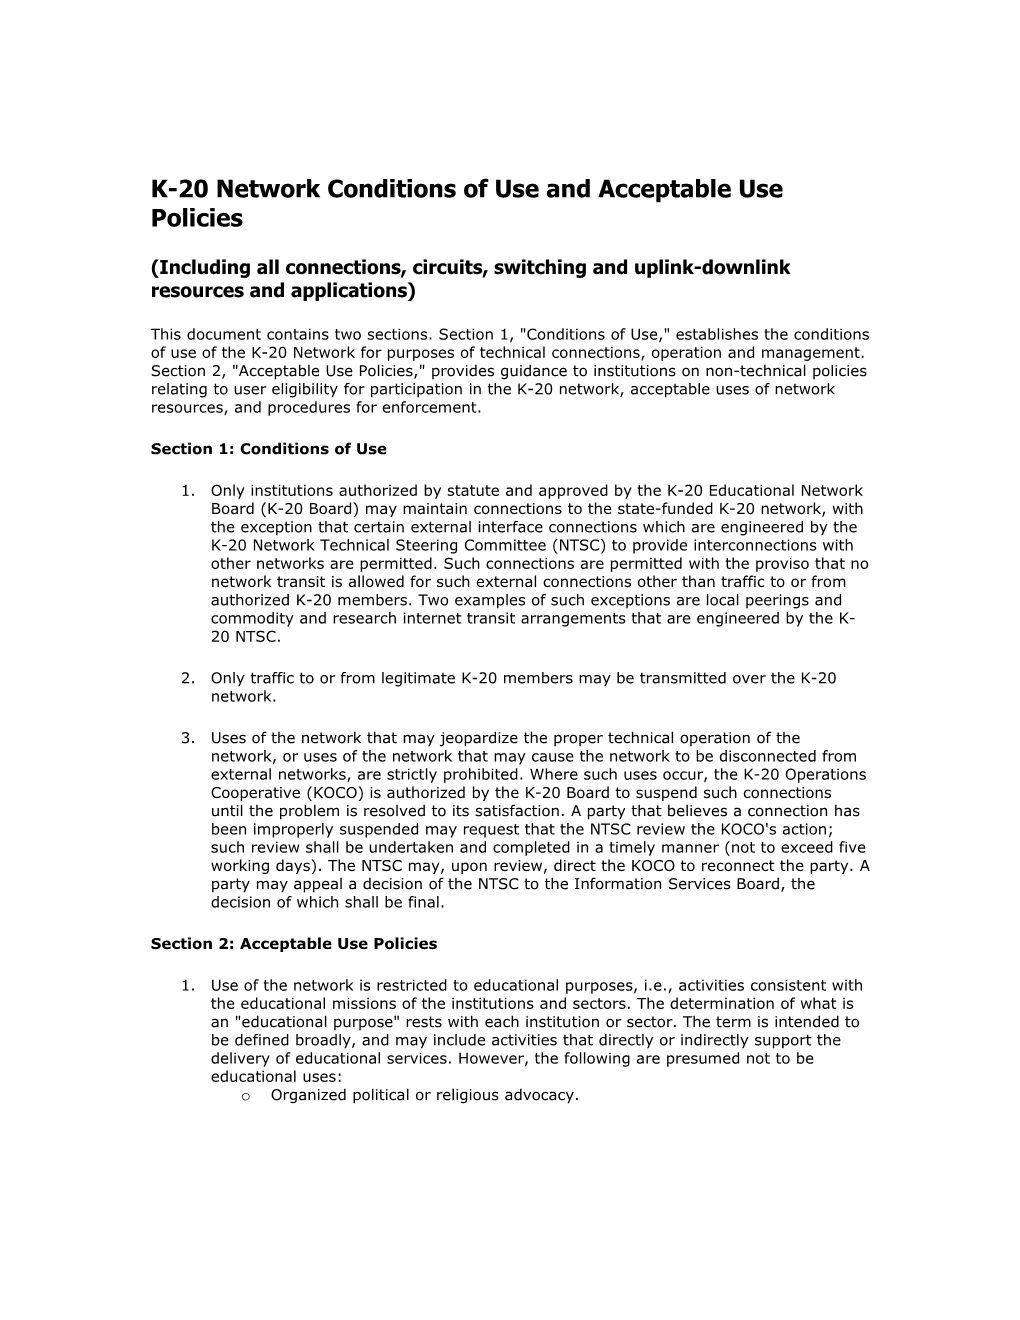 K-20 Network Conditions of Use and Acceptable Use Policies